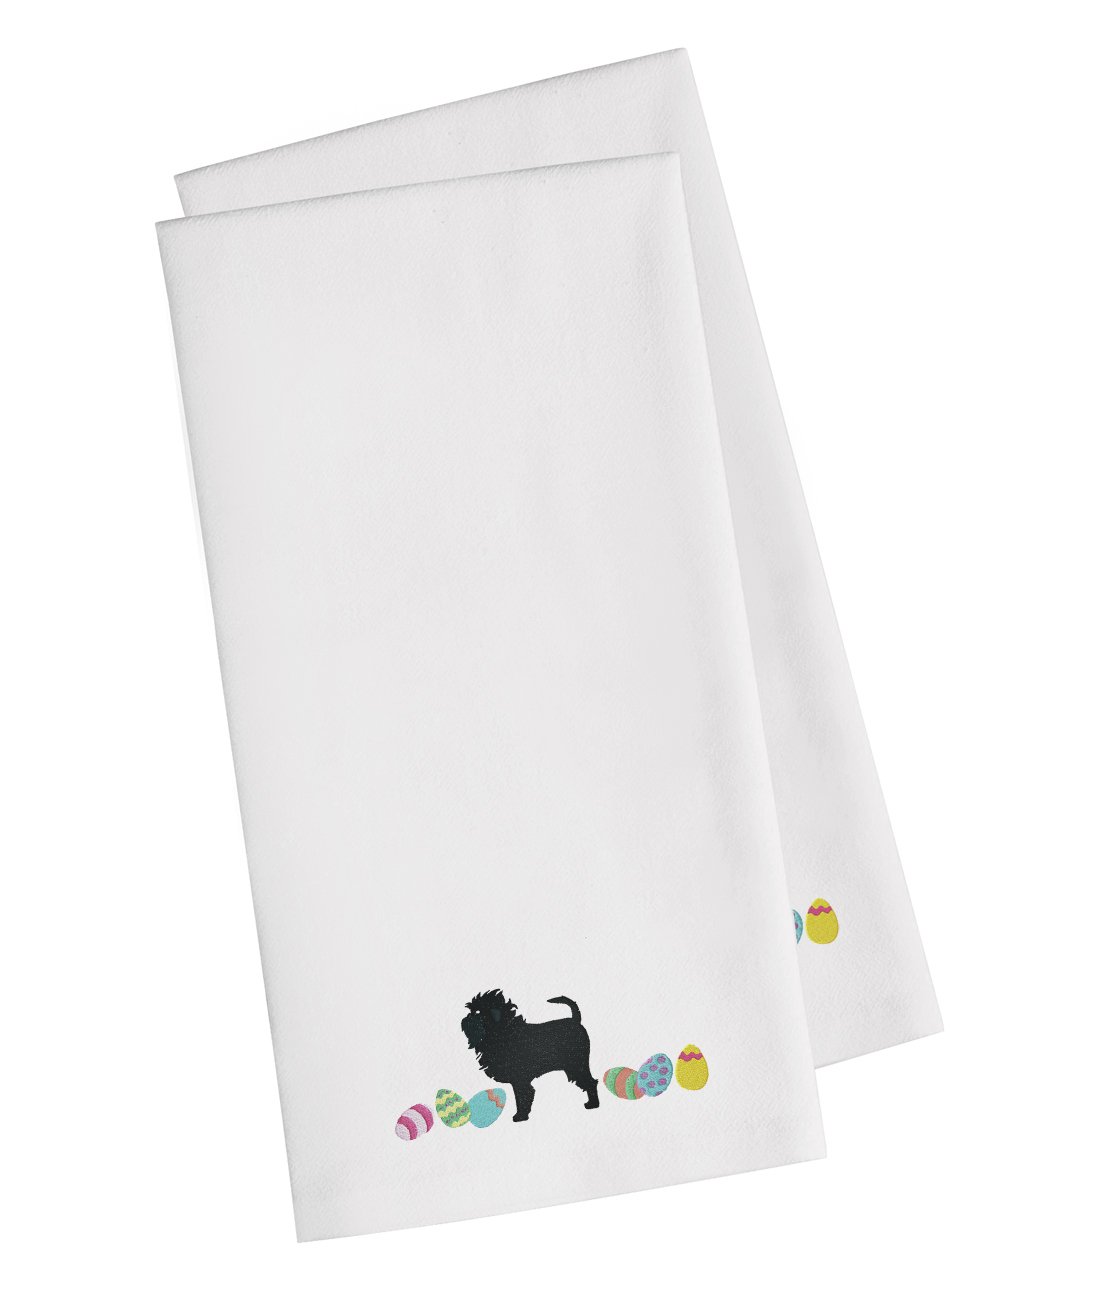 Affenpinscher Easter White Embroidered Kitchen Towel Set of 2 CK1591WHTWE by Caroline's Treasures